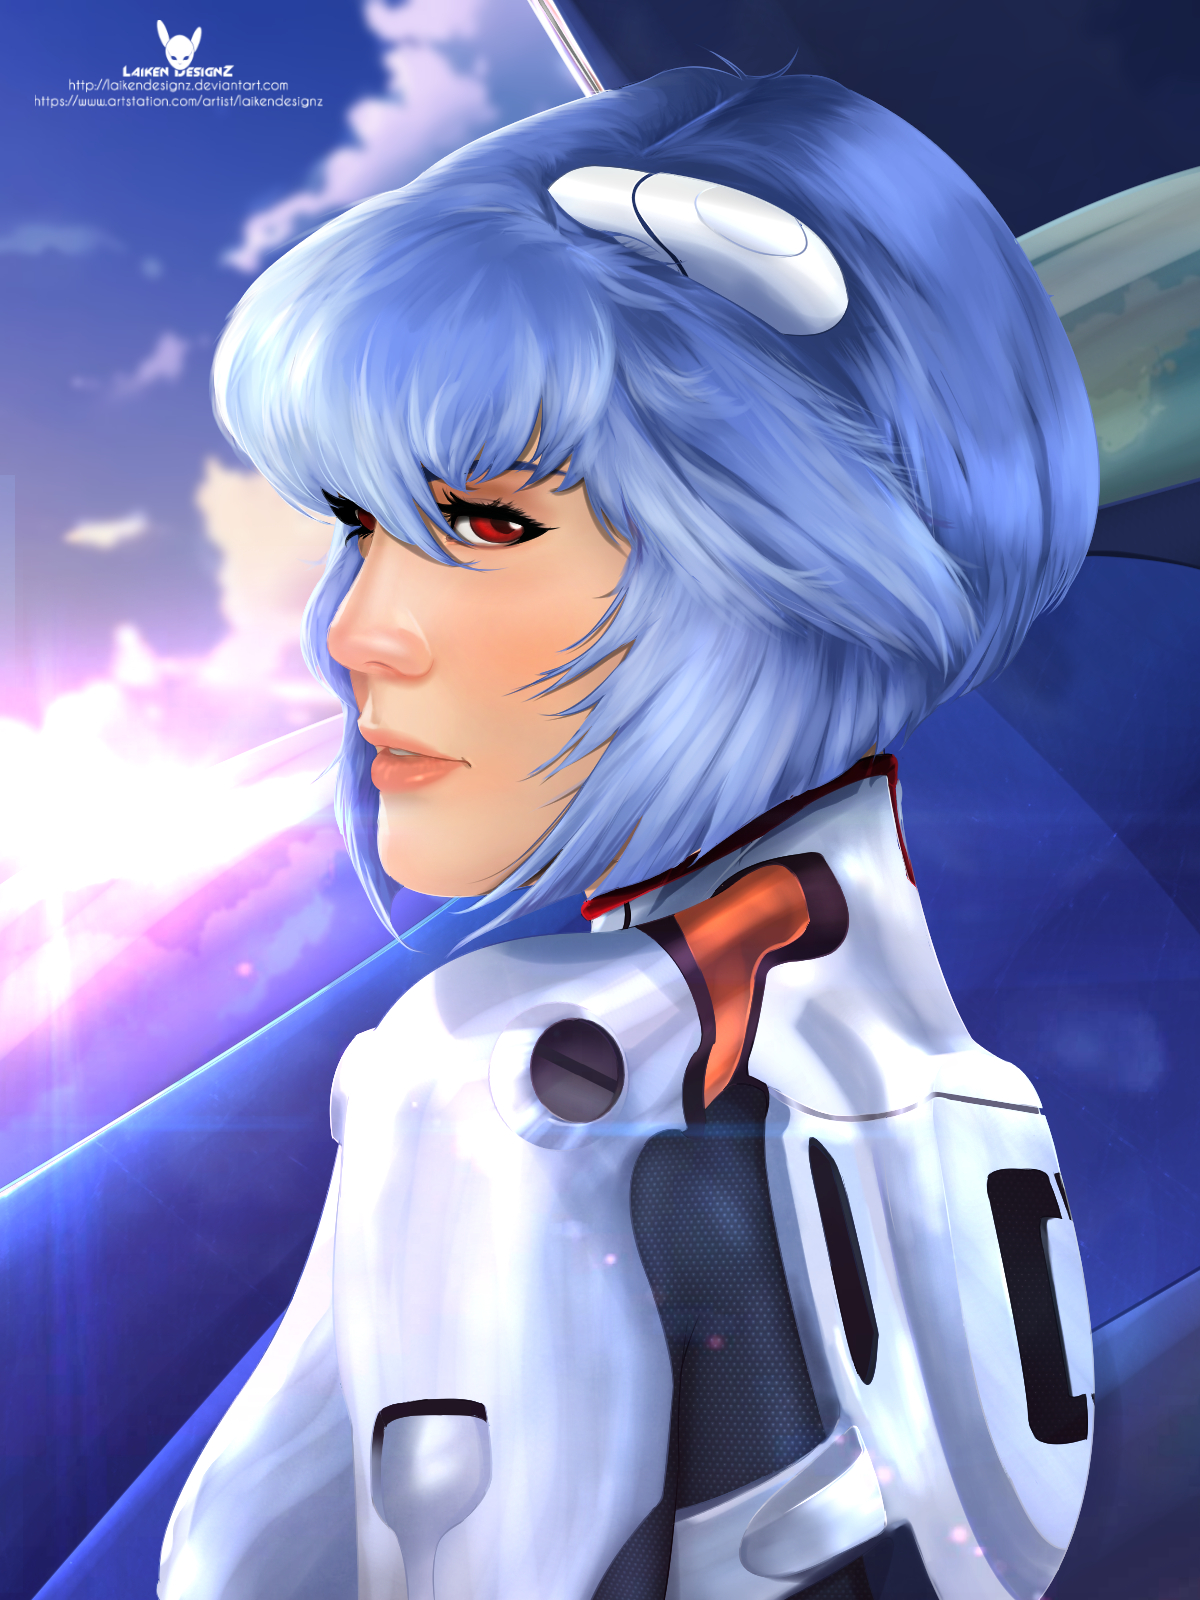 Neon Genesis Evangelion - Rei Ayanami by hes6789 on 